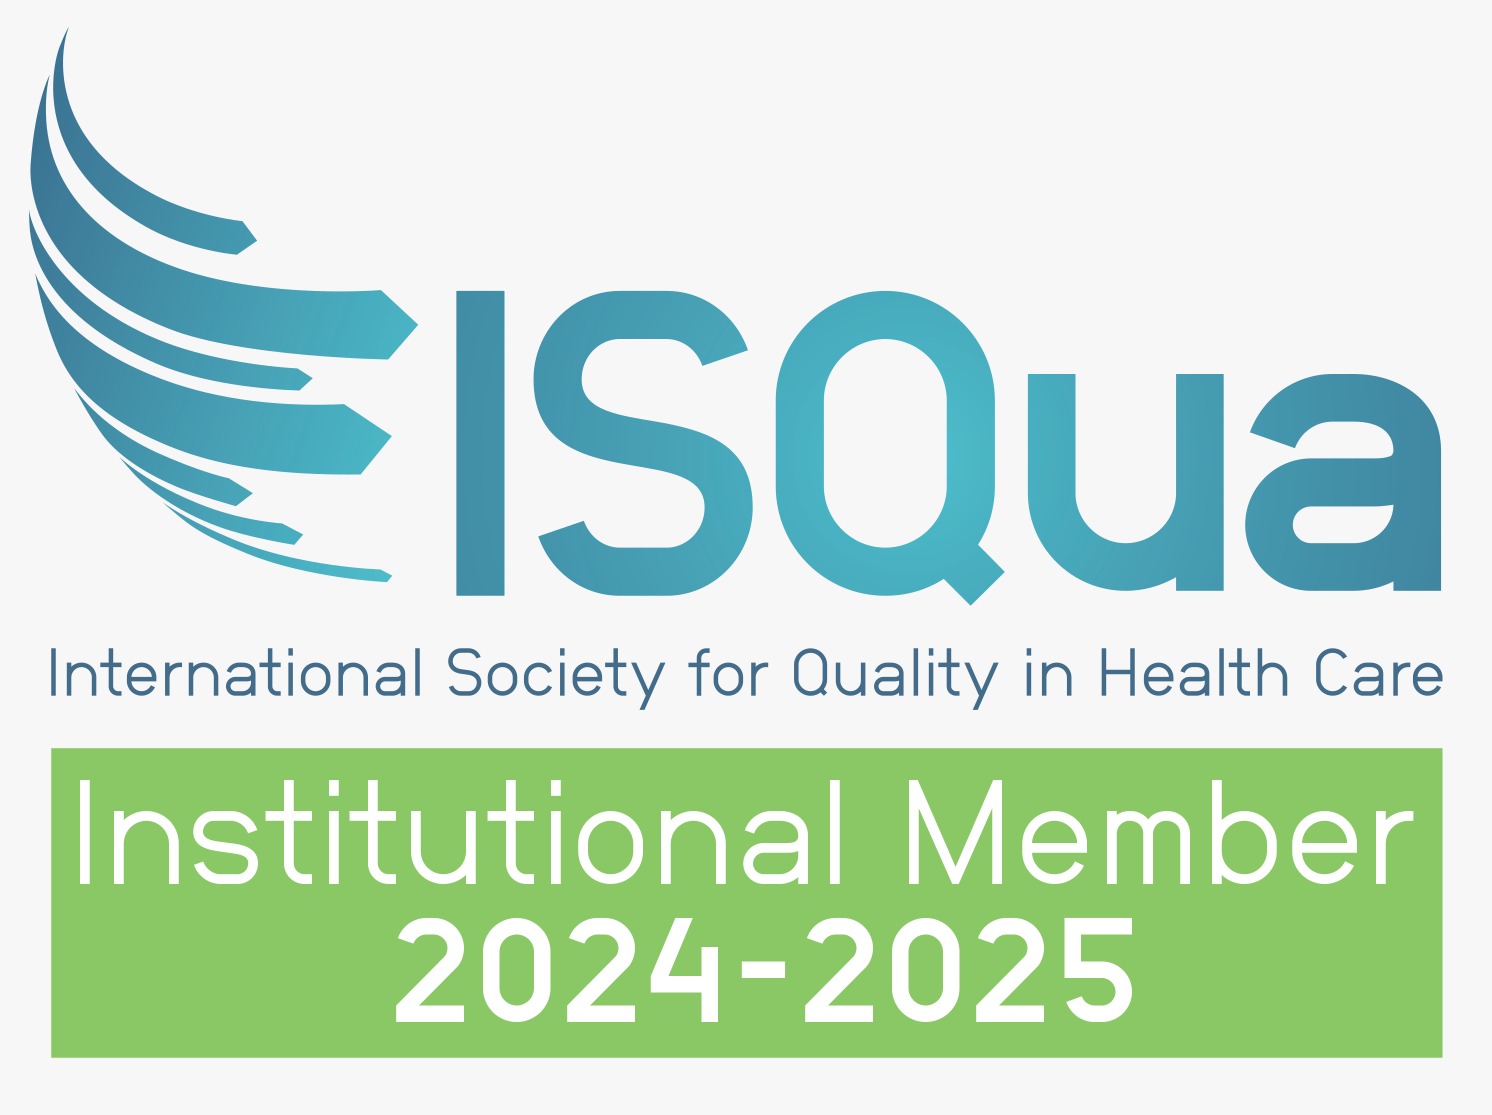 The International Society for Quality in Health Care